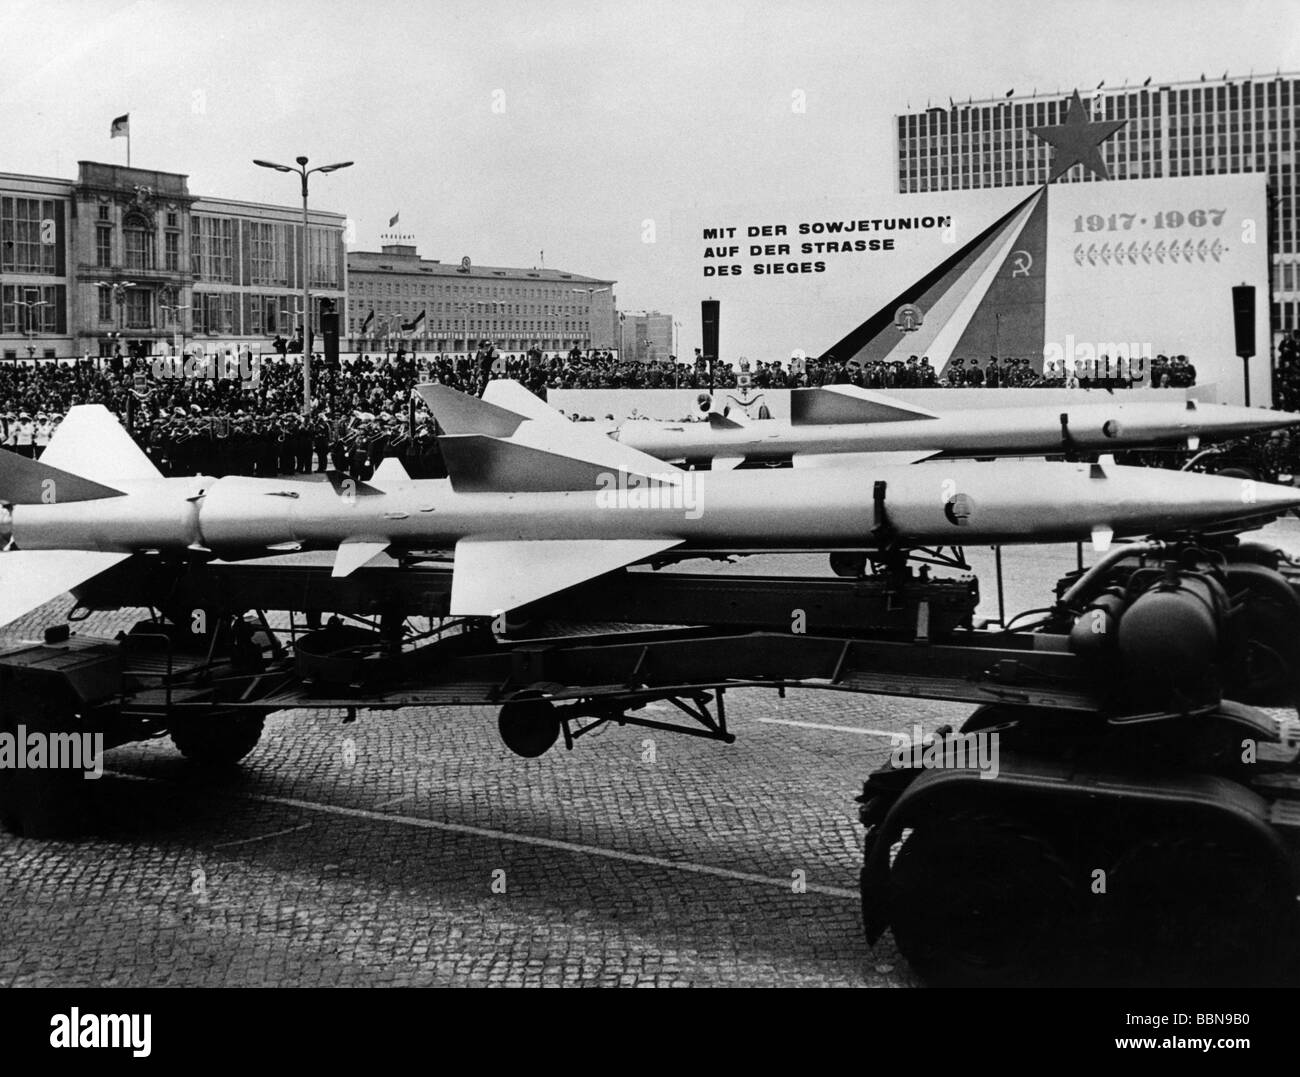 military, East Germany, Air Forces/Air Defence, anti-aircraft missiles S-75 'Dvina', 1st May parade, East Berlin, 1.5.1967, , Stock Photo